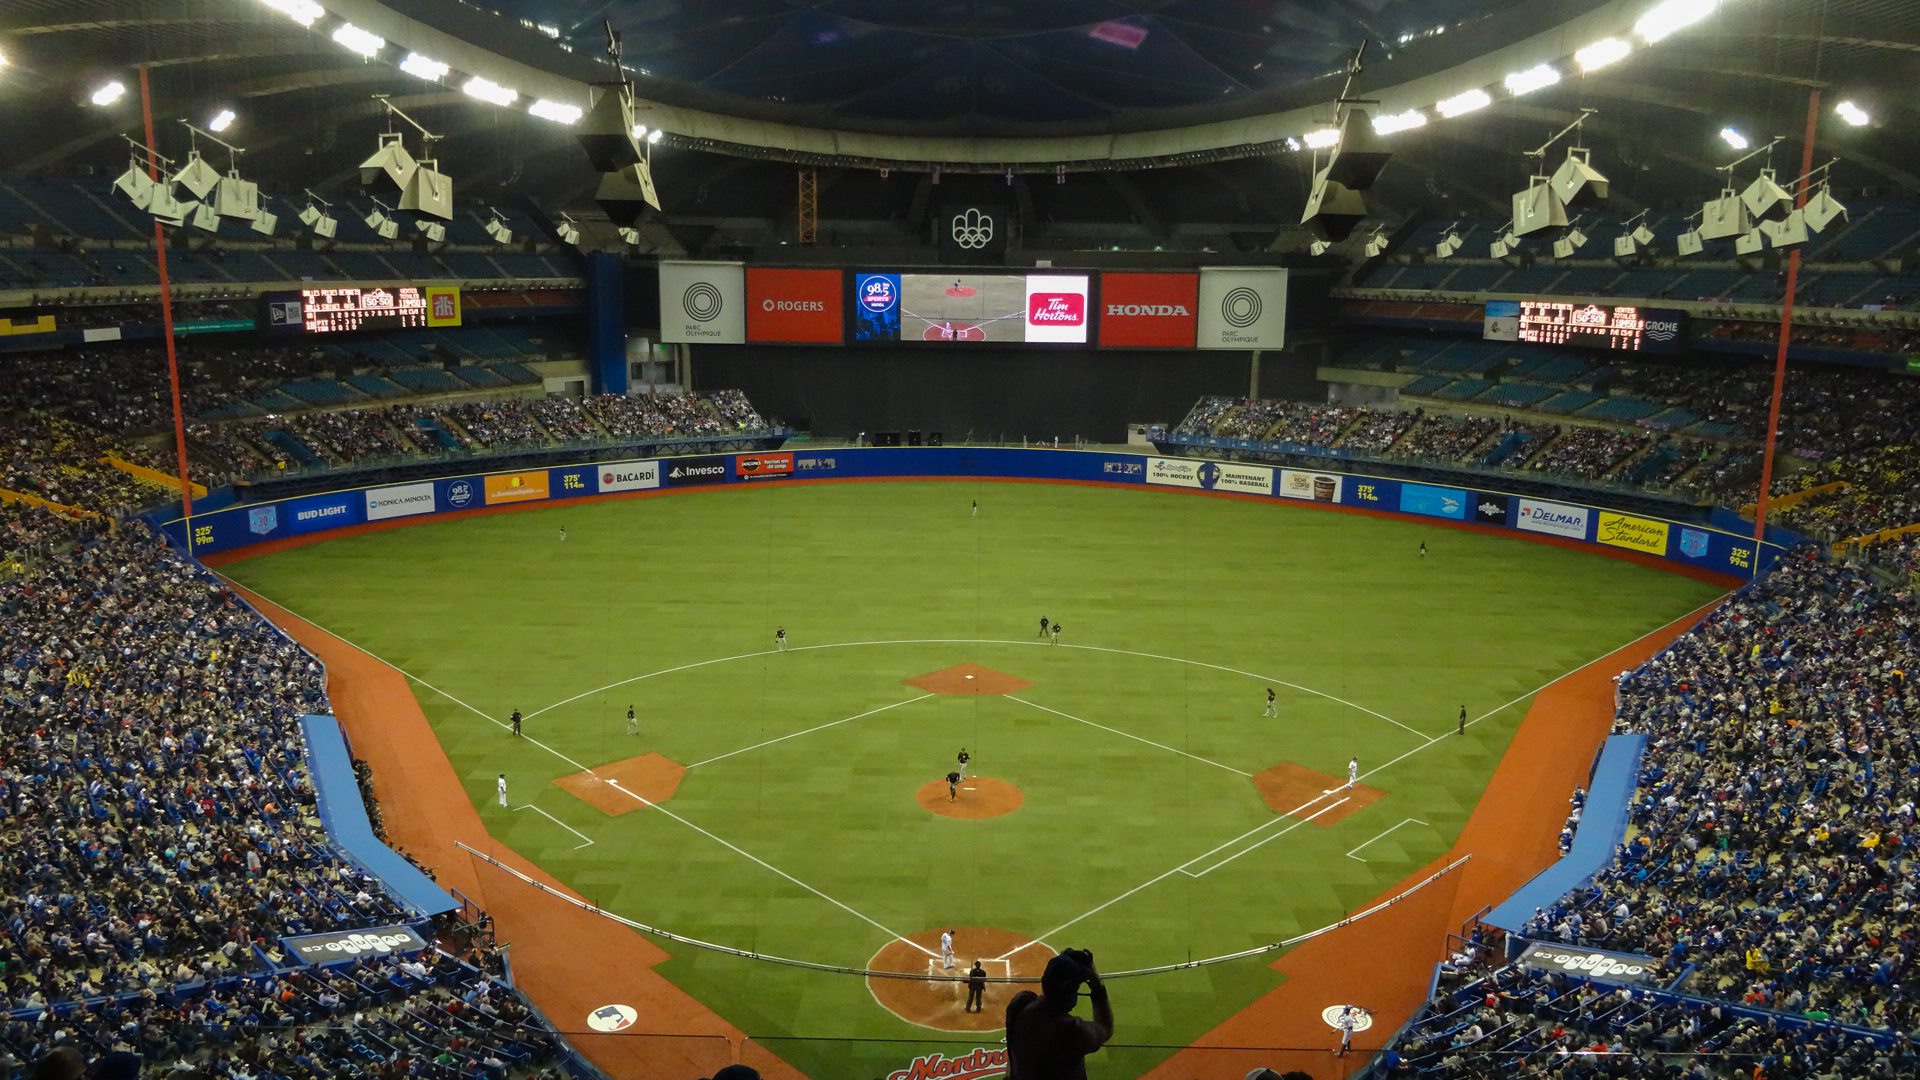 Spring Expo: Cardinals headed to Montreal to face Blue Jays